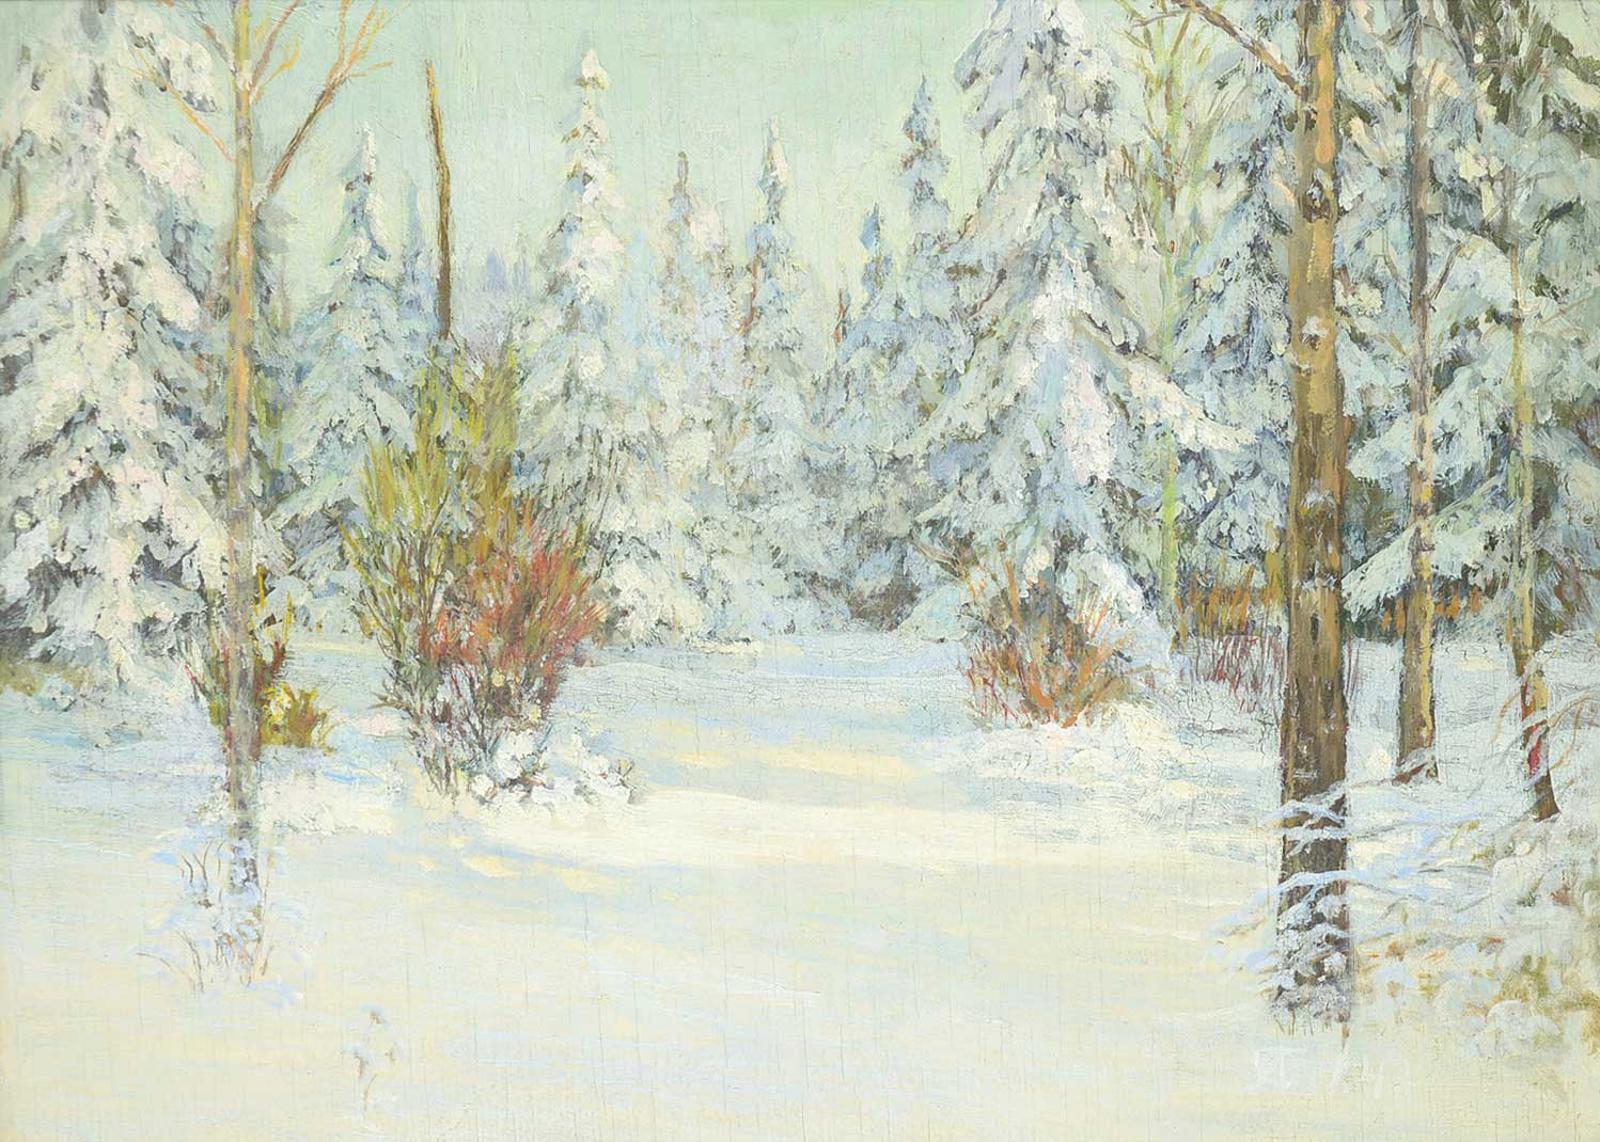 Albin Jr. Cartmell - Untitled - Through the Snowy Trees